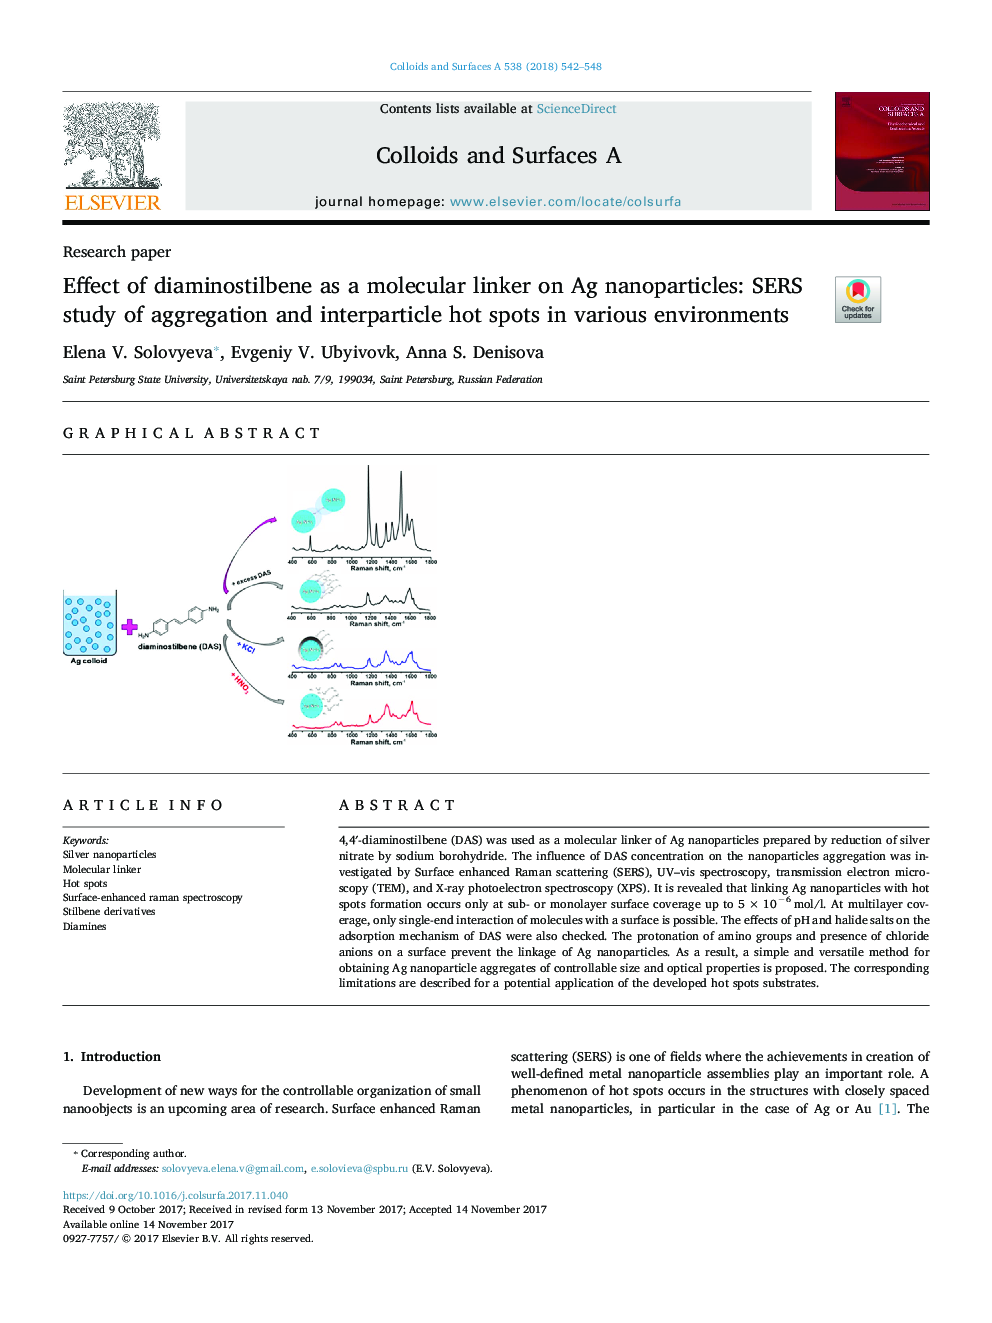 Effect of diaminostilbene as a molecular linker on Ag nanoparticles: SERS study of aggregation and interparticle hot spots in various environments